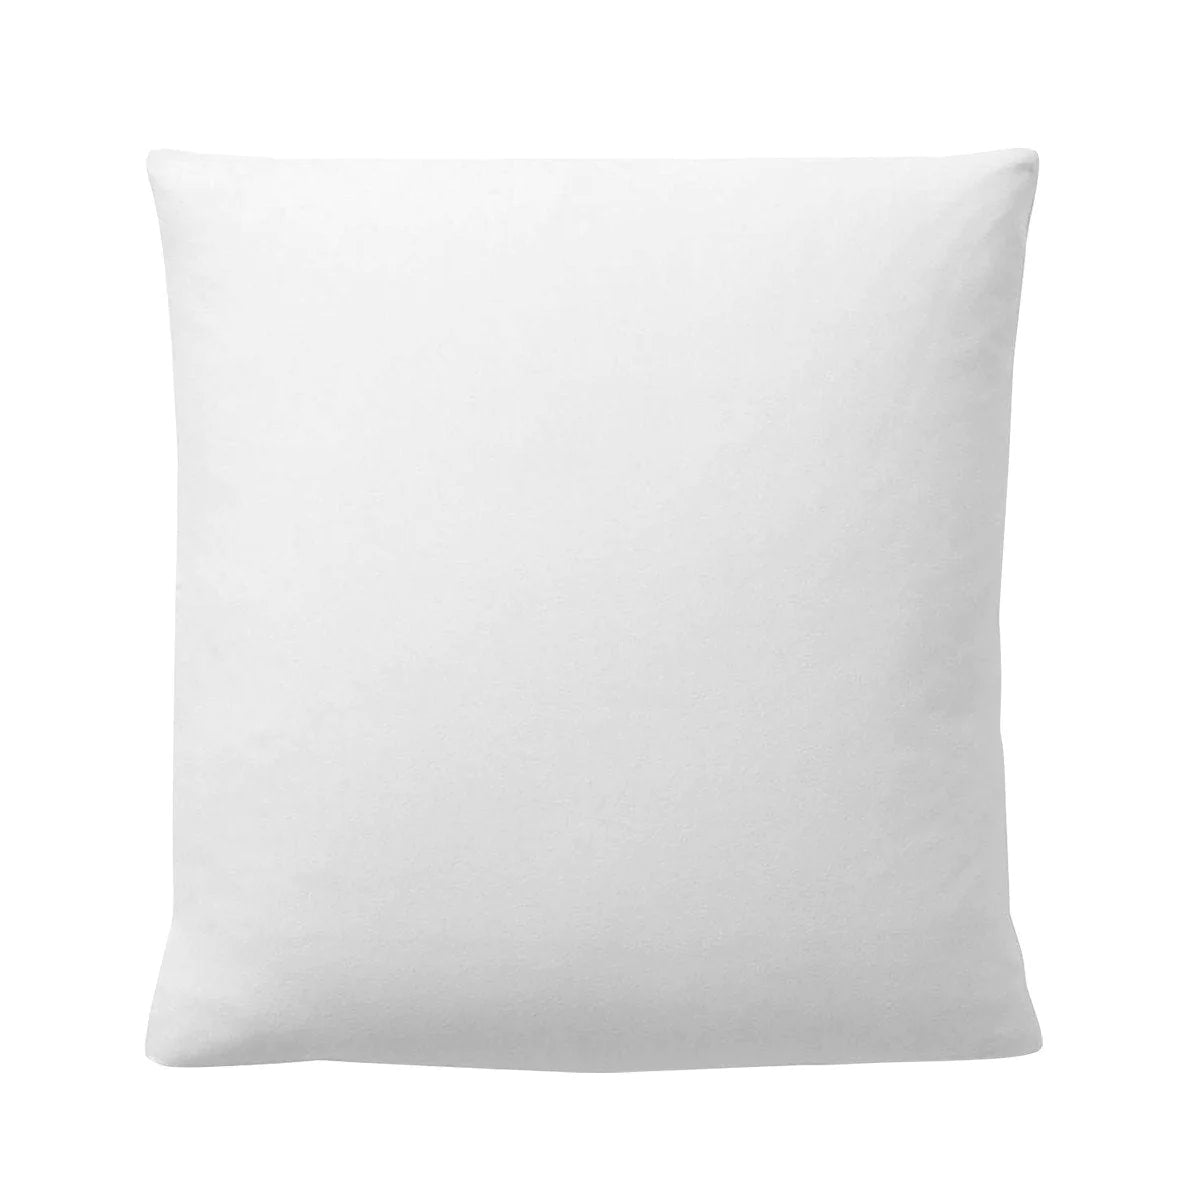 Yves Delorme Pillow Protector